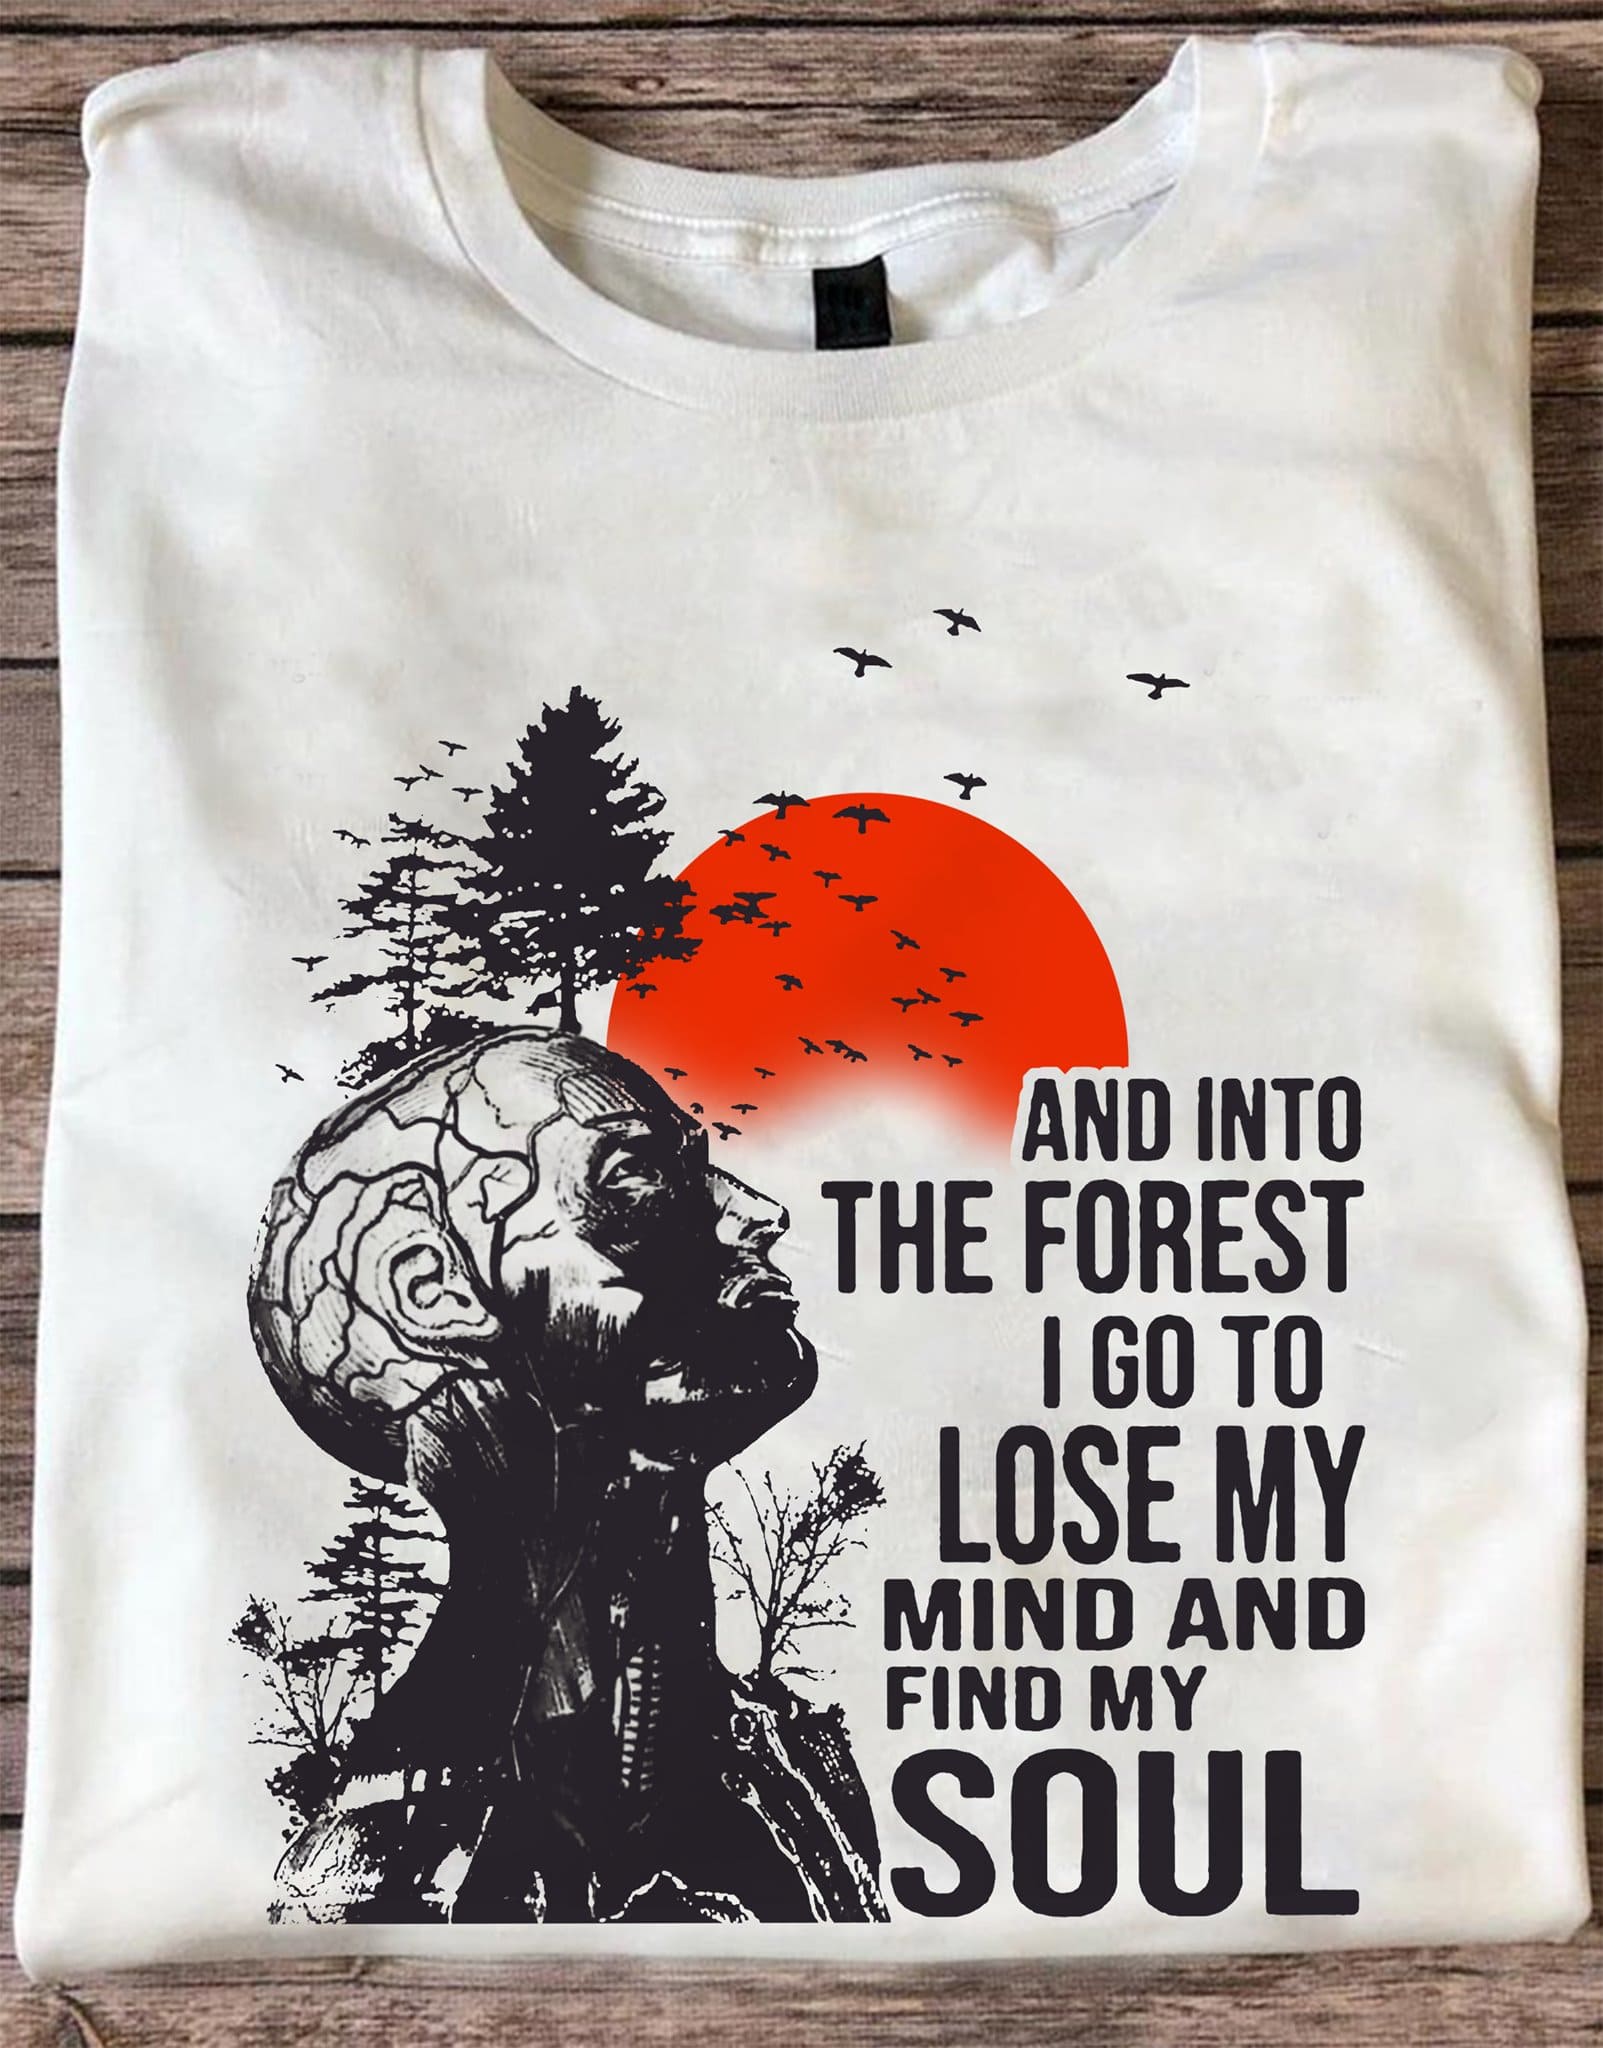 And into the forest I go to lose my mind and find my soul - Human of nature, man versus nature